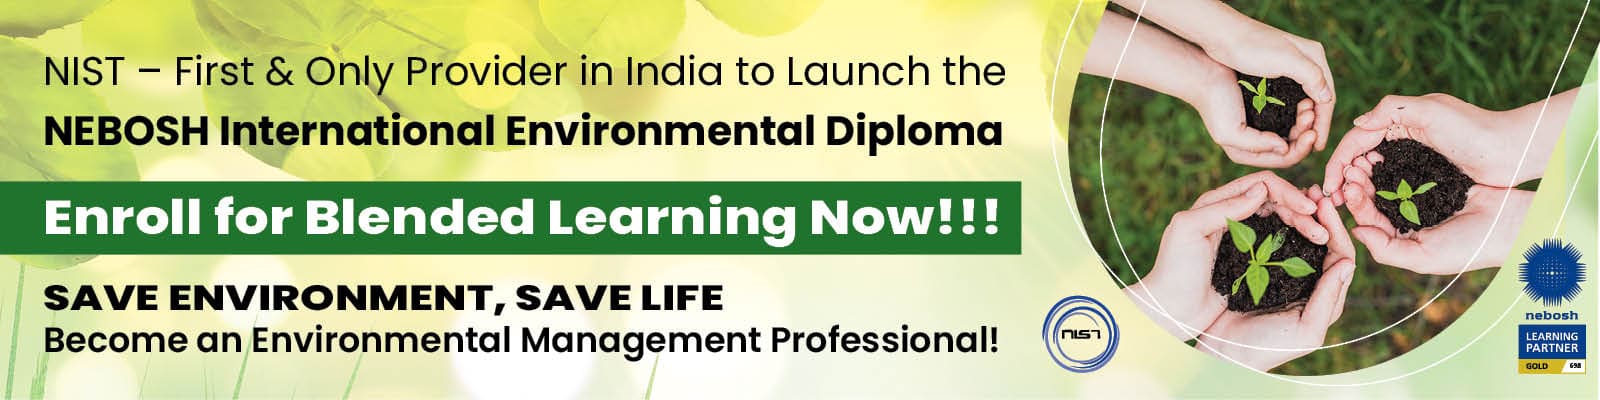 nist-launches-the-nebosh-international-diploma-in-environmental-management